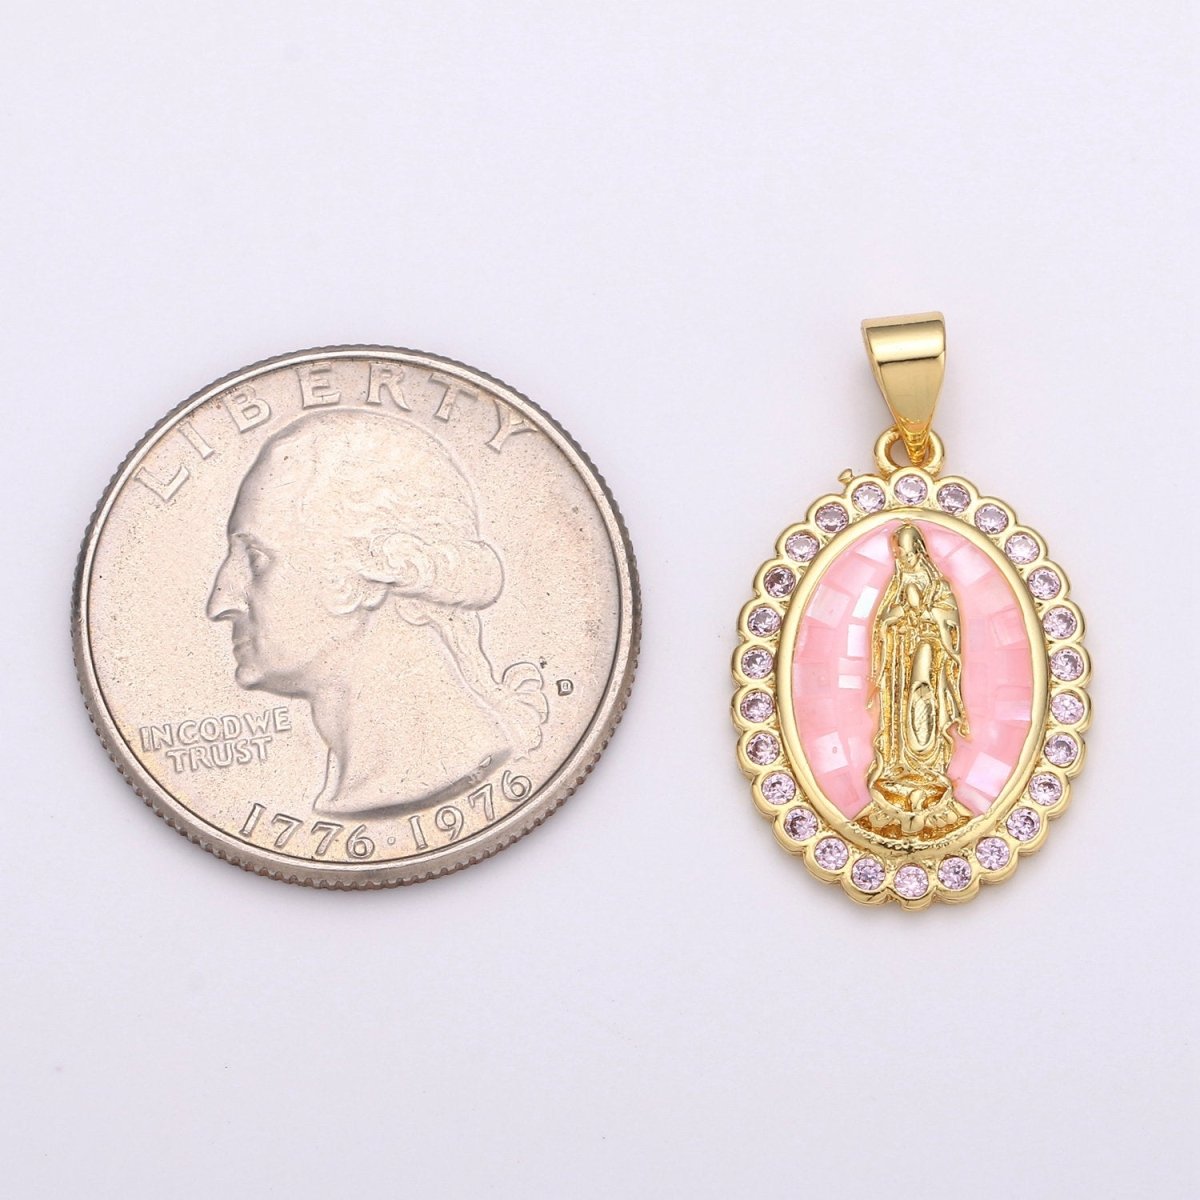 Pink Virgin Mary Charm for Necklace, Dainty Lady Guadalupe Pendant for Religious Jewelry Making Supply in Gold Filled I-778 B-882 - DLUXCA